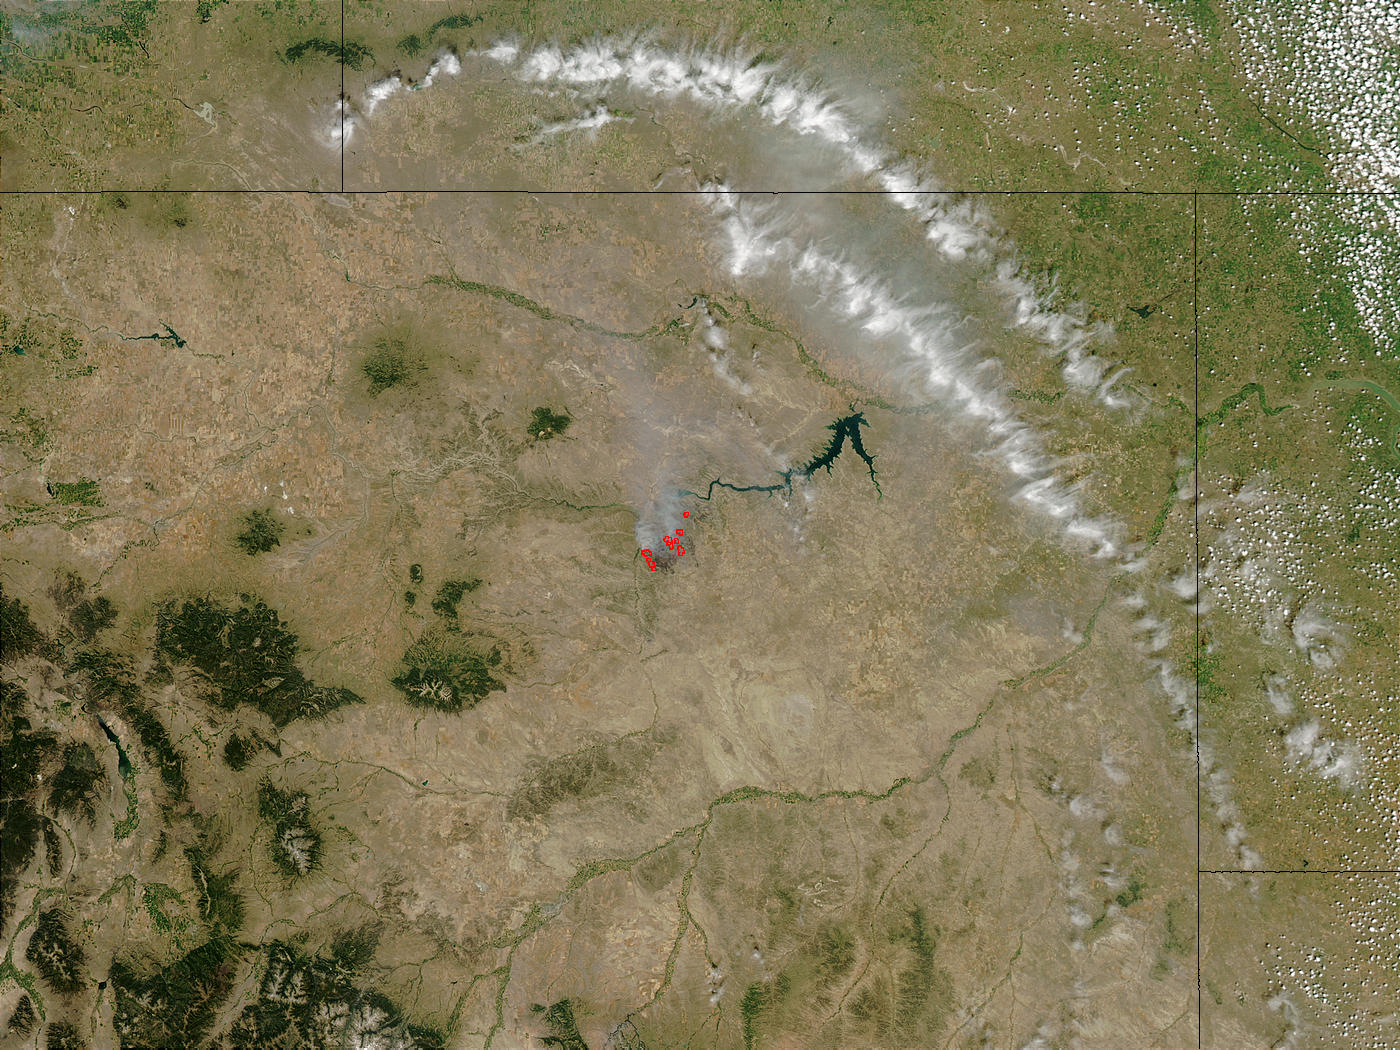 Missouri Breaks Complex Fire, Montana - related image preview